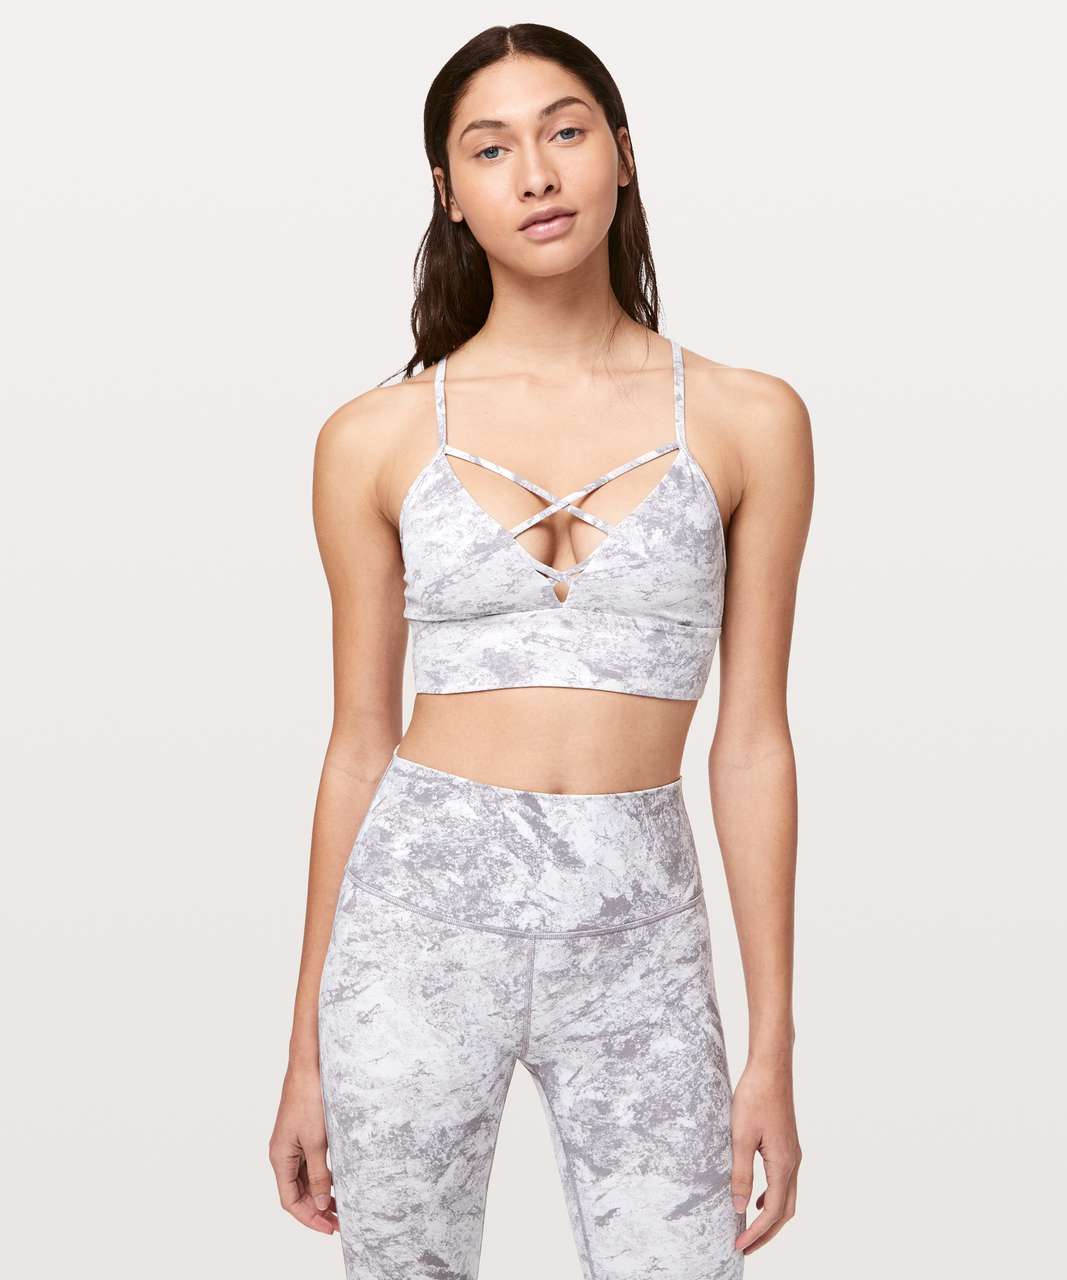 Lululemon Expand Your Limits Bra - Washed Marble Alpine White Silverscreen